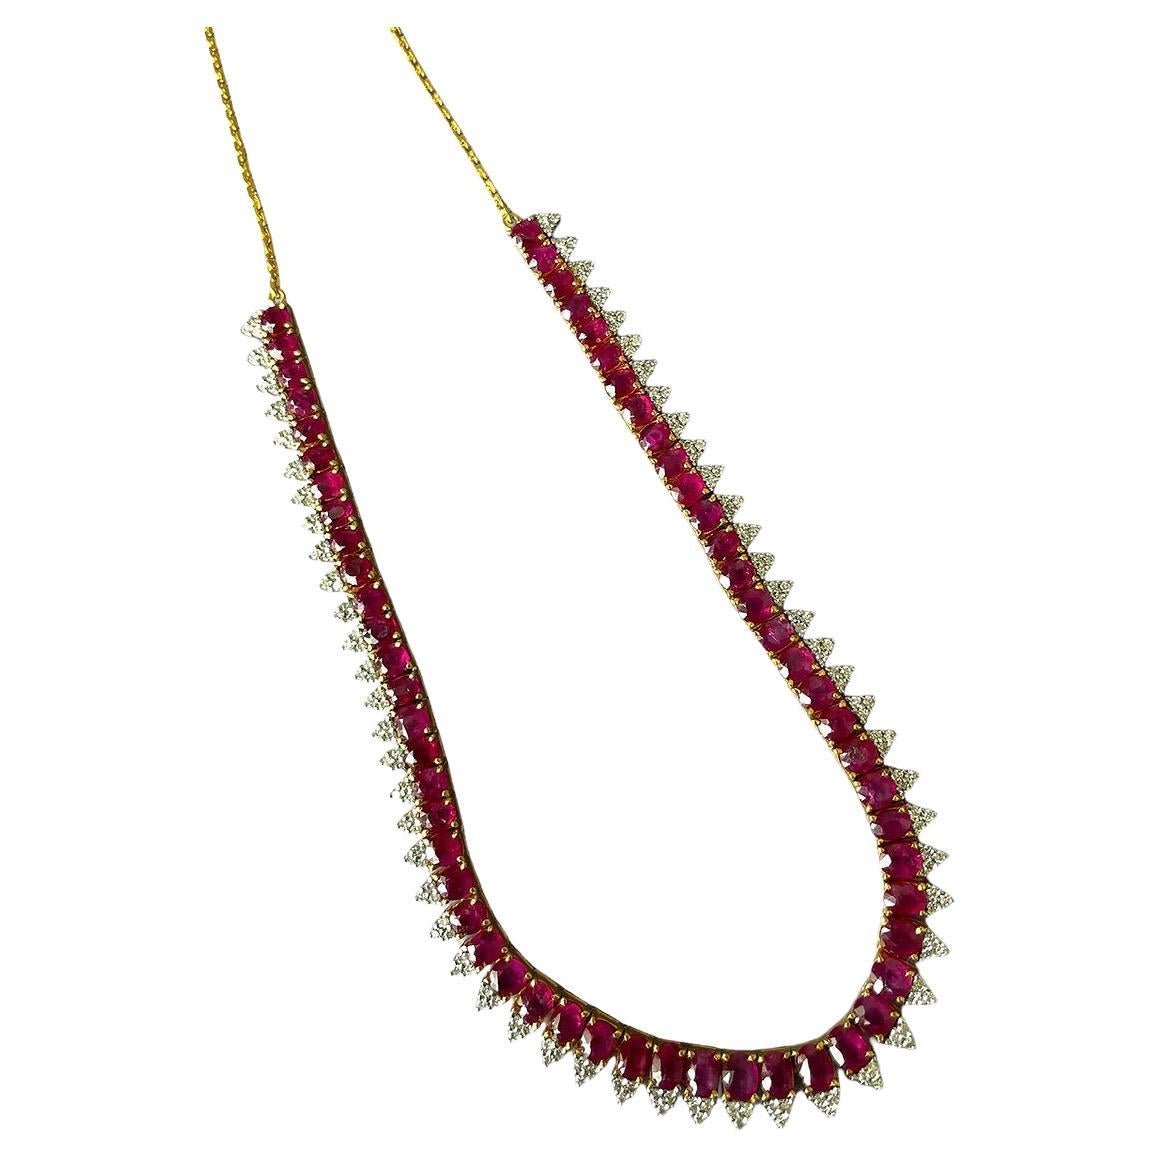 Unheated Burma Ruby Necklace with Natural Diamonds in 18k solid gold